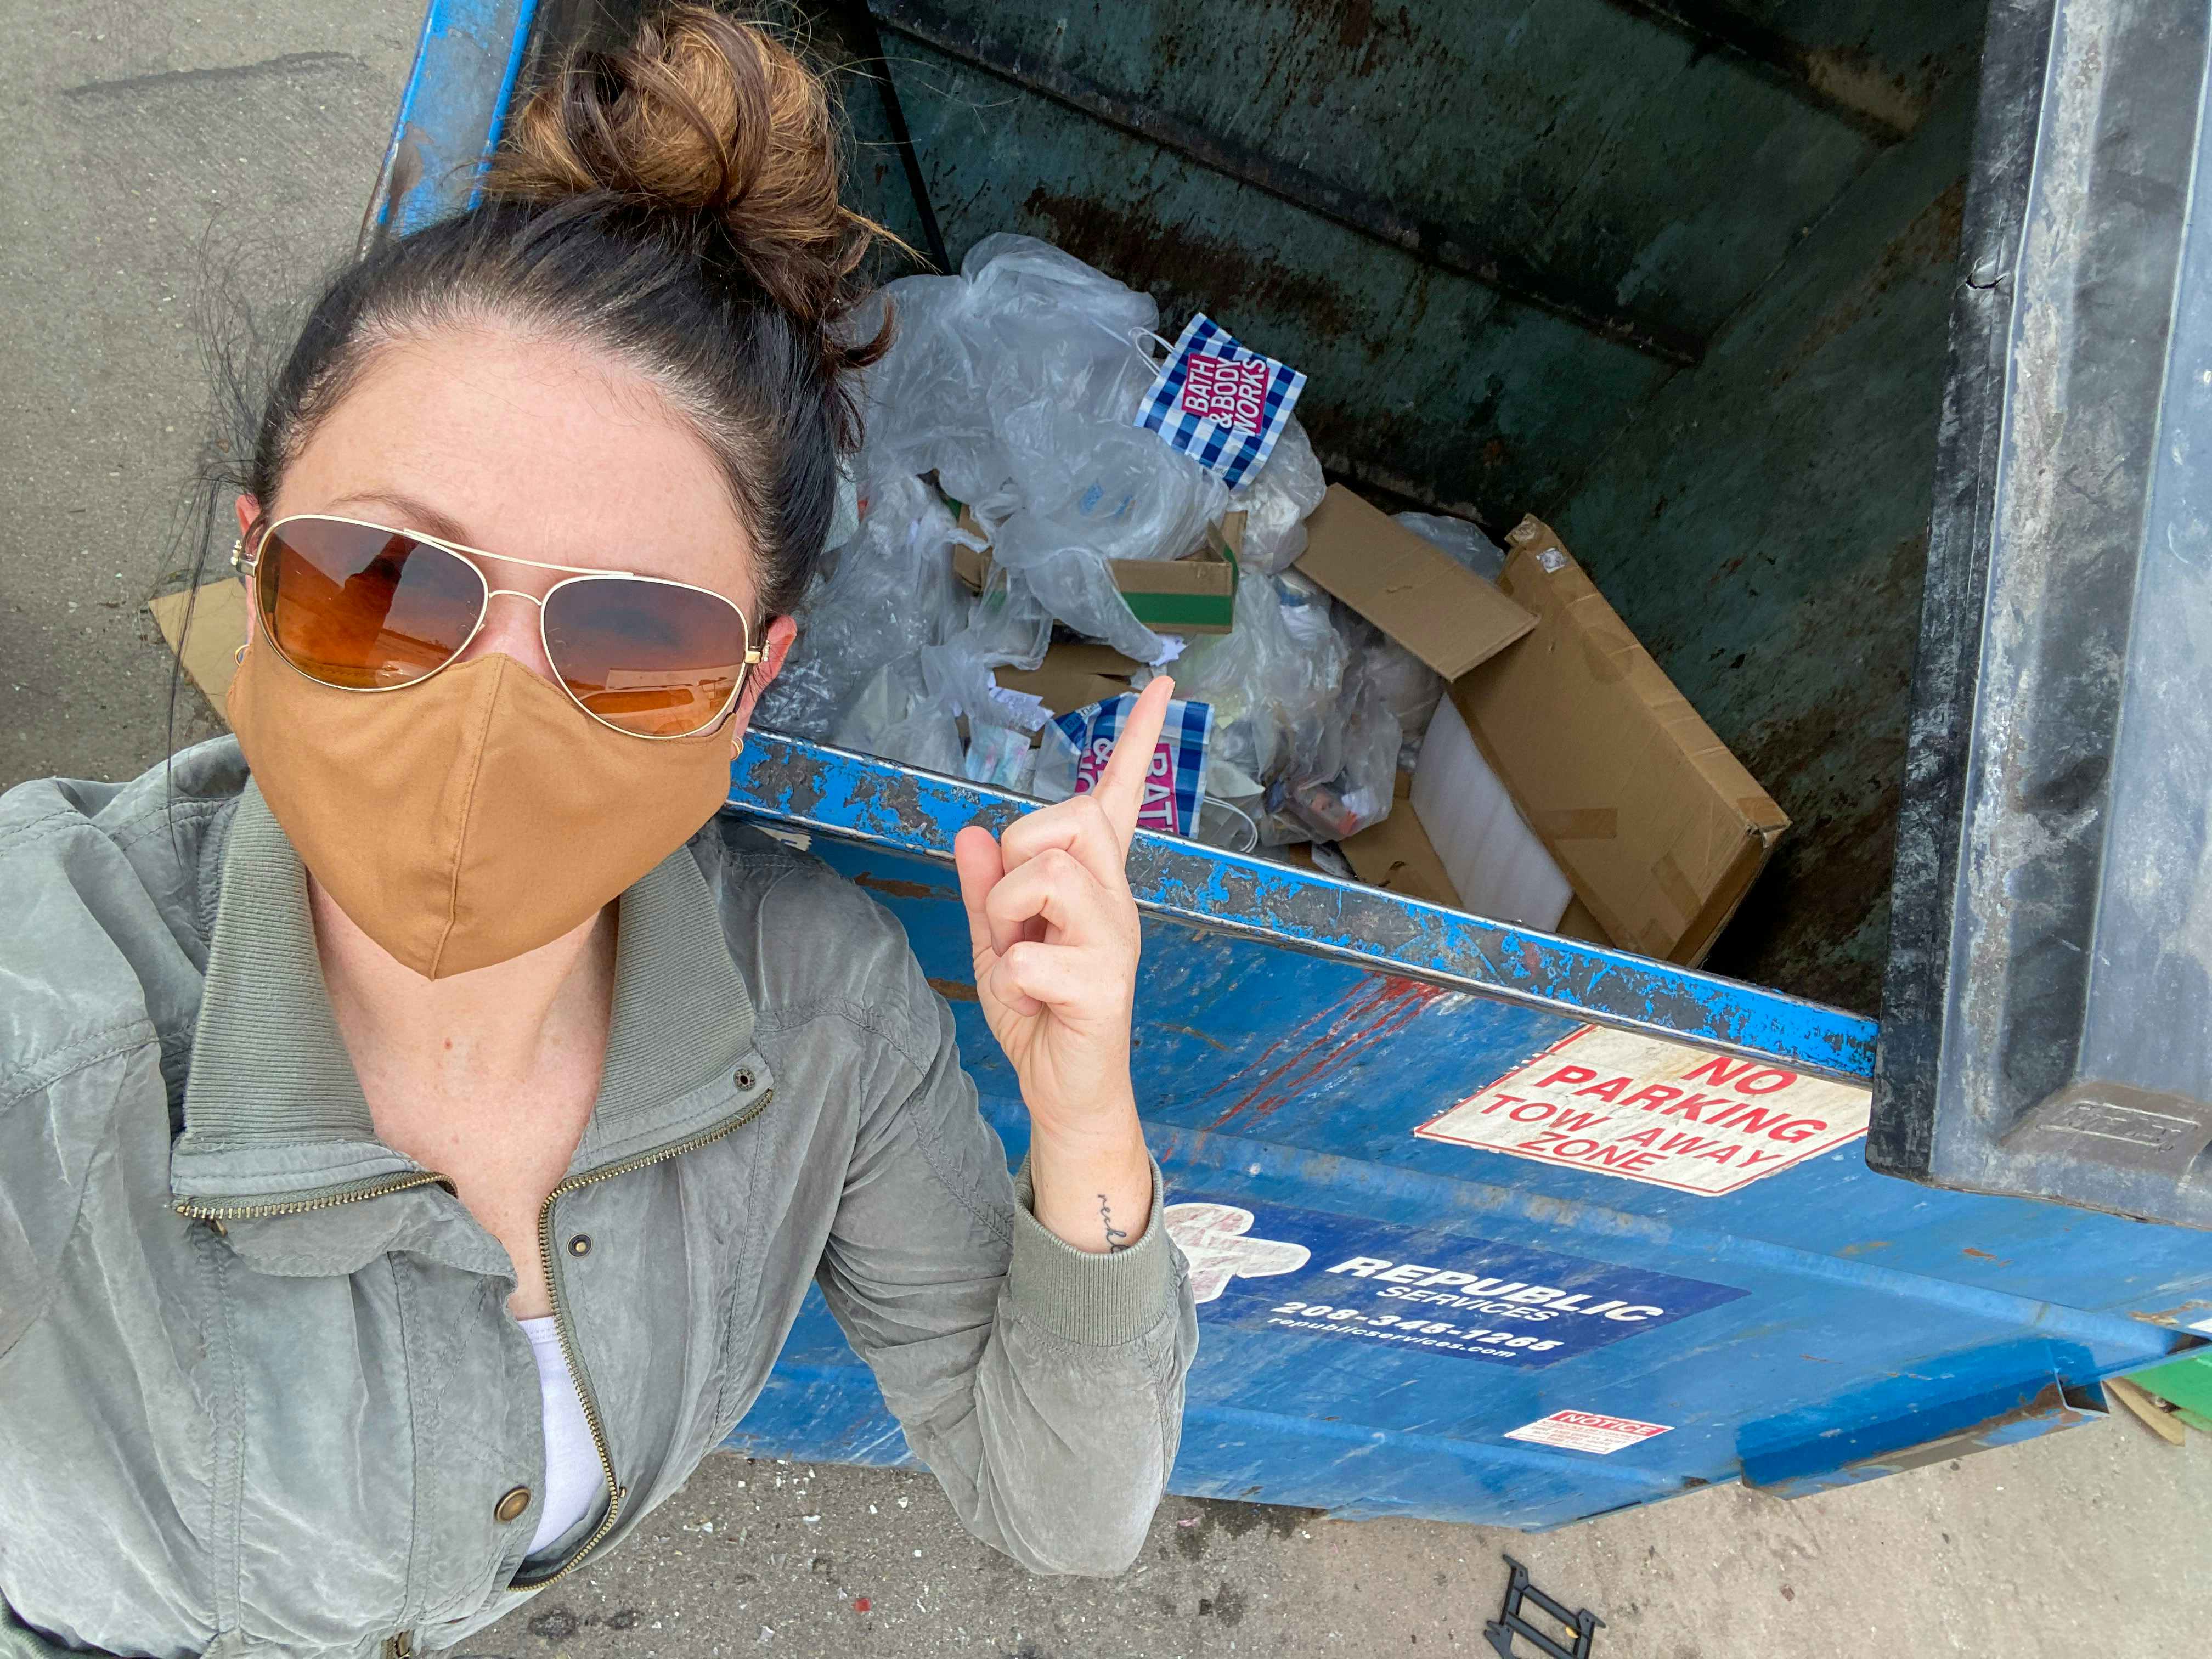 A woman standing by a dumpster, pointing to the discarded Bath & Body Works bags and products inside.